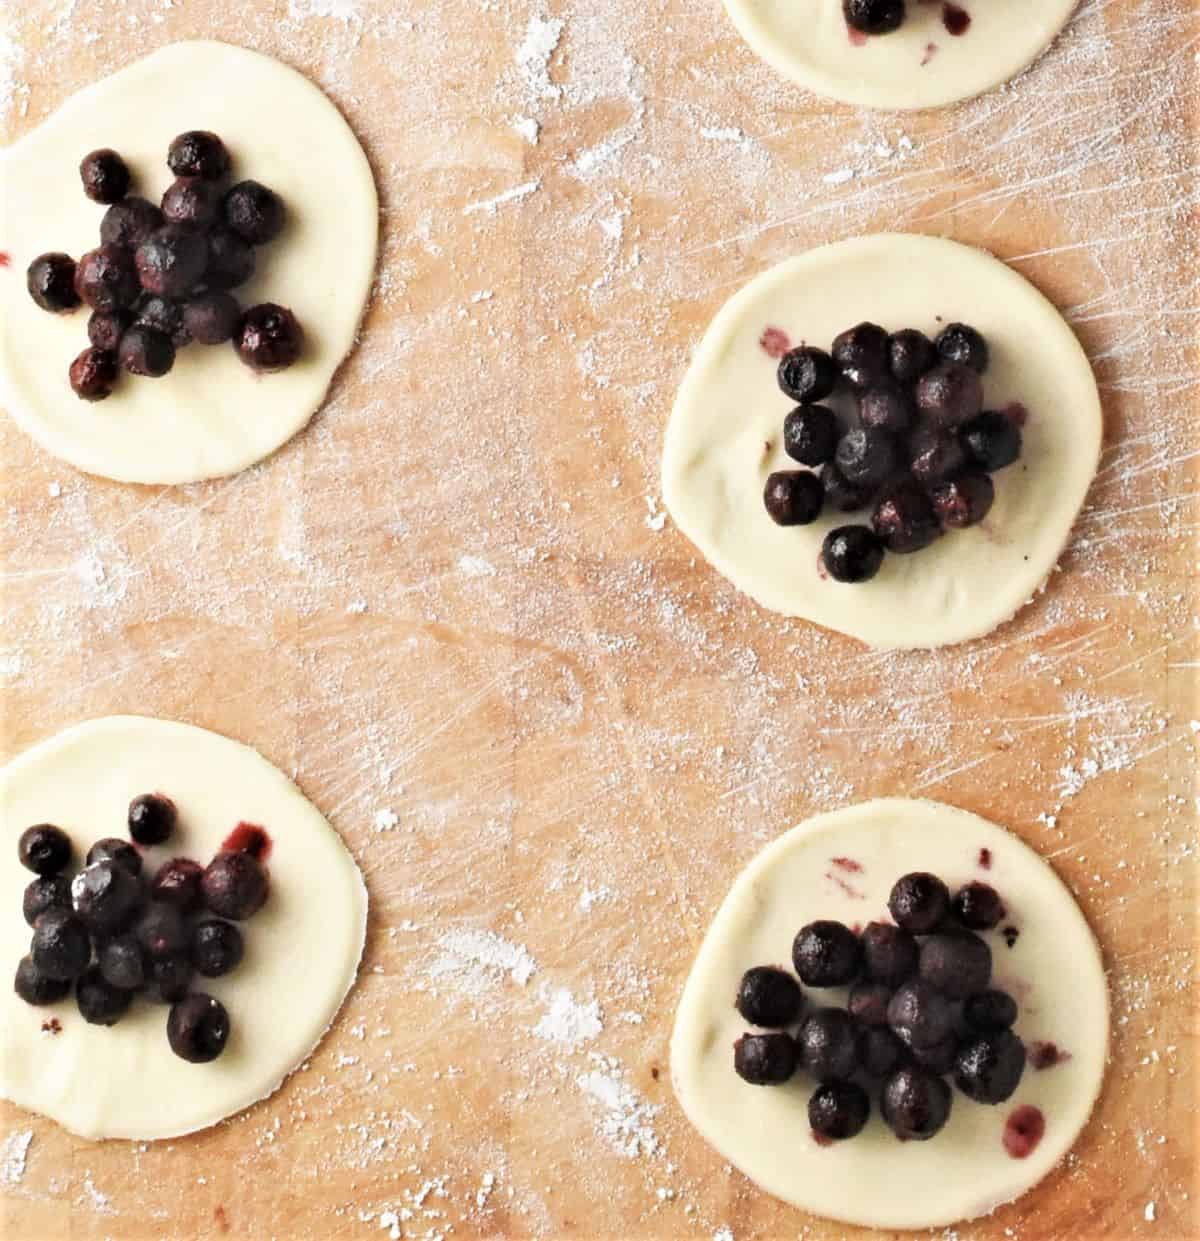 Pierogi rounds with blueberries in centre.